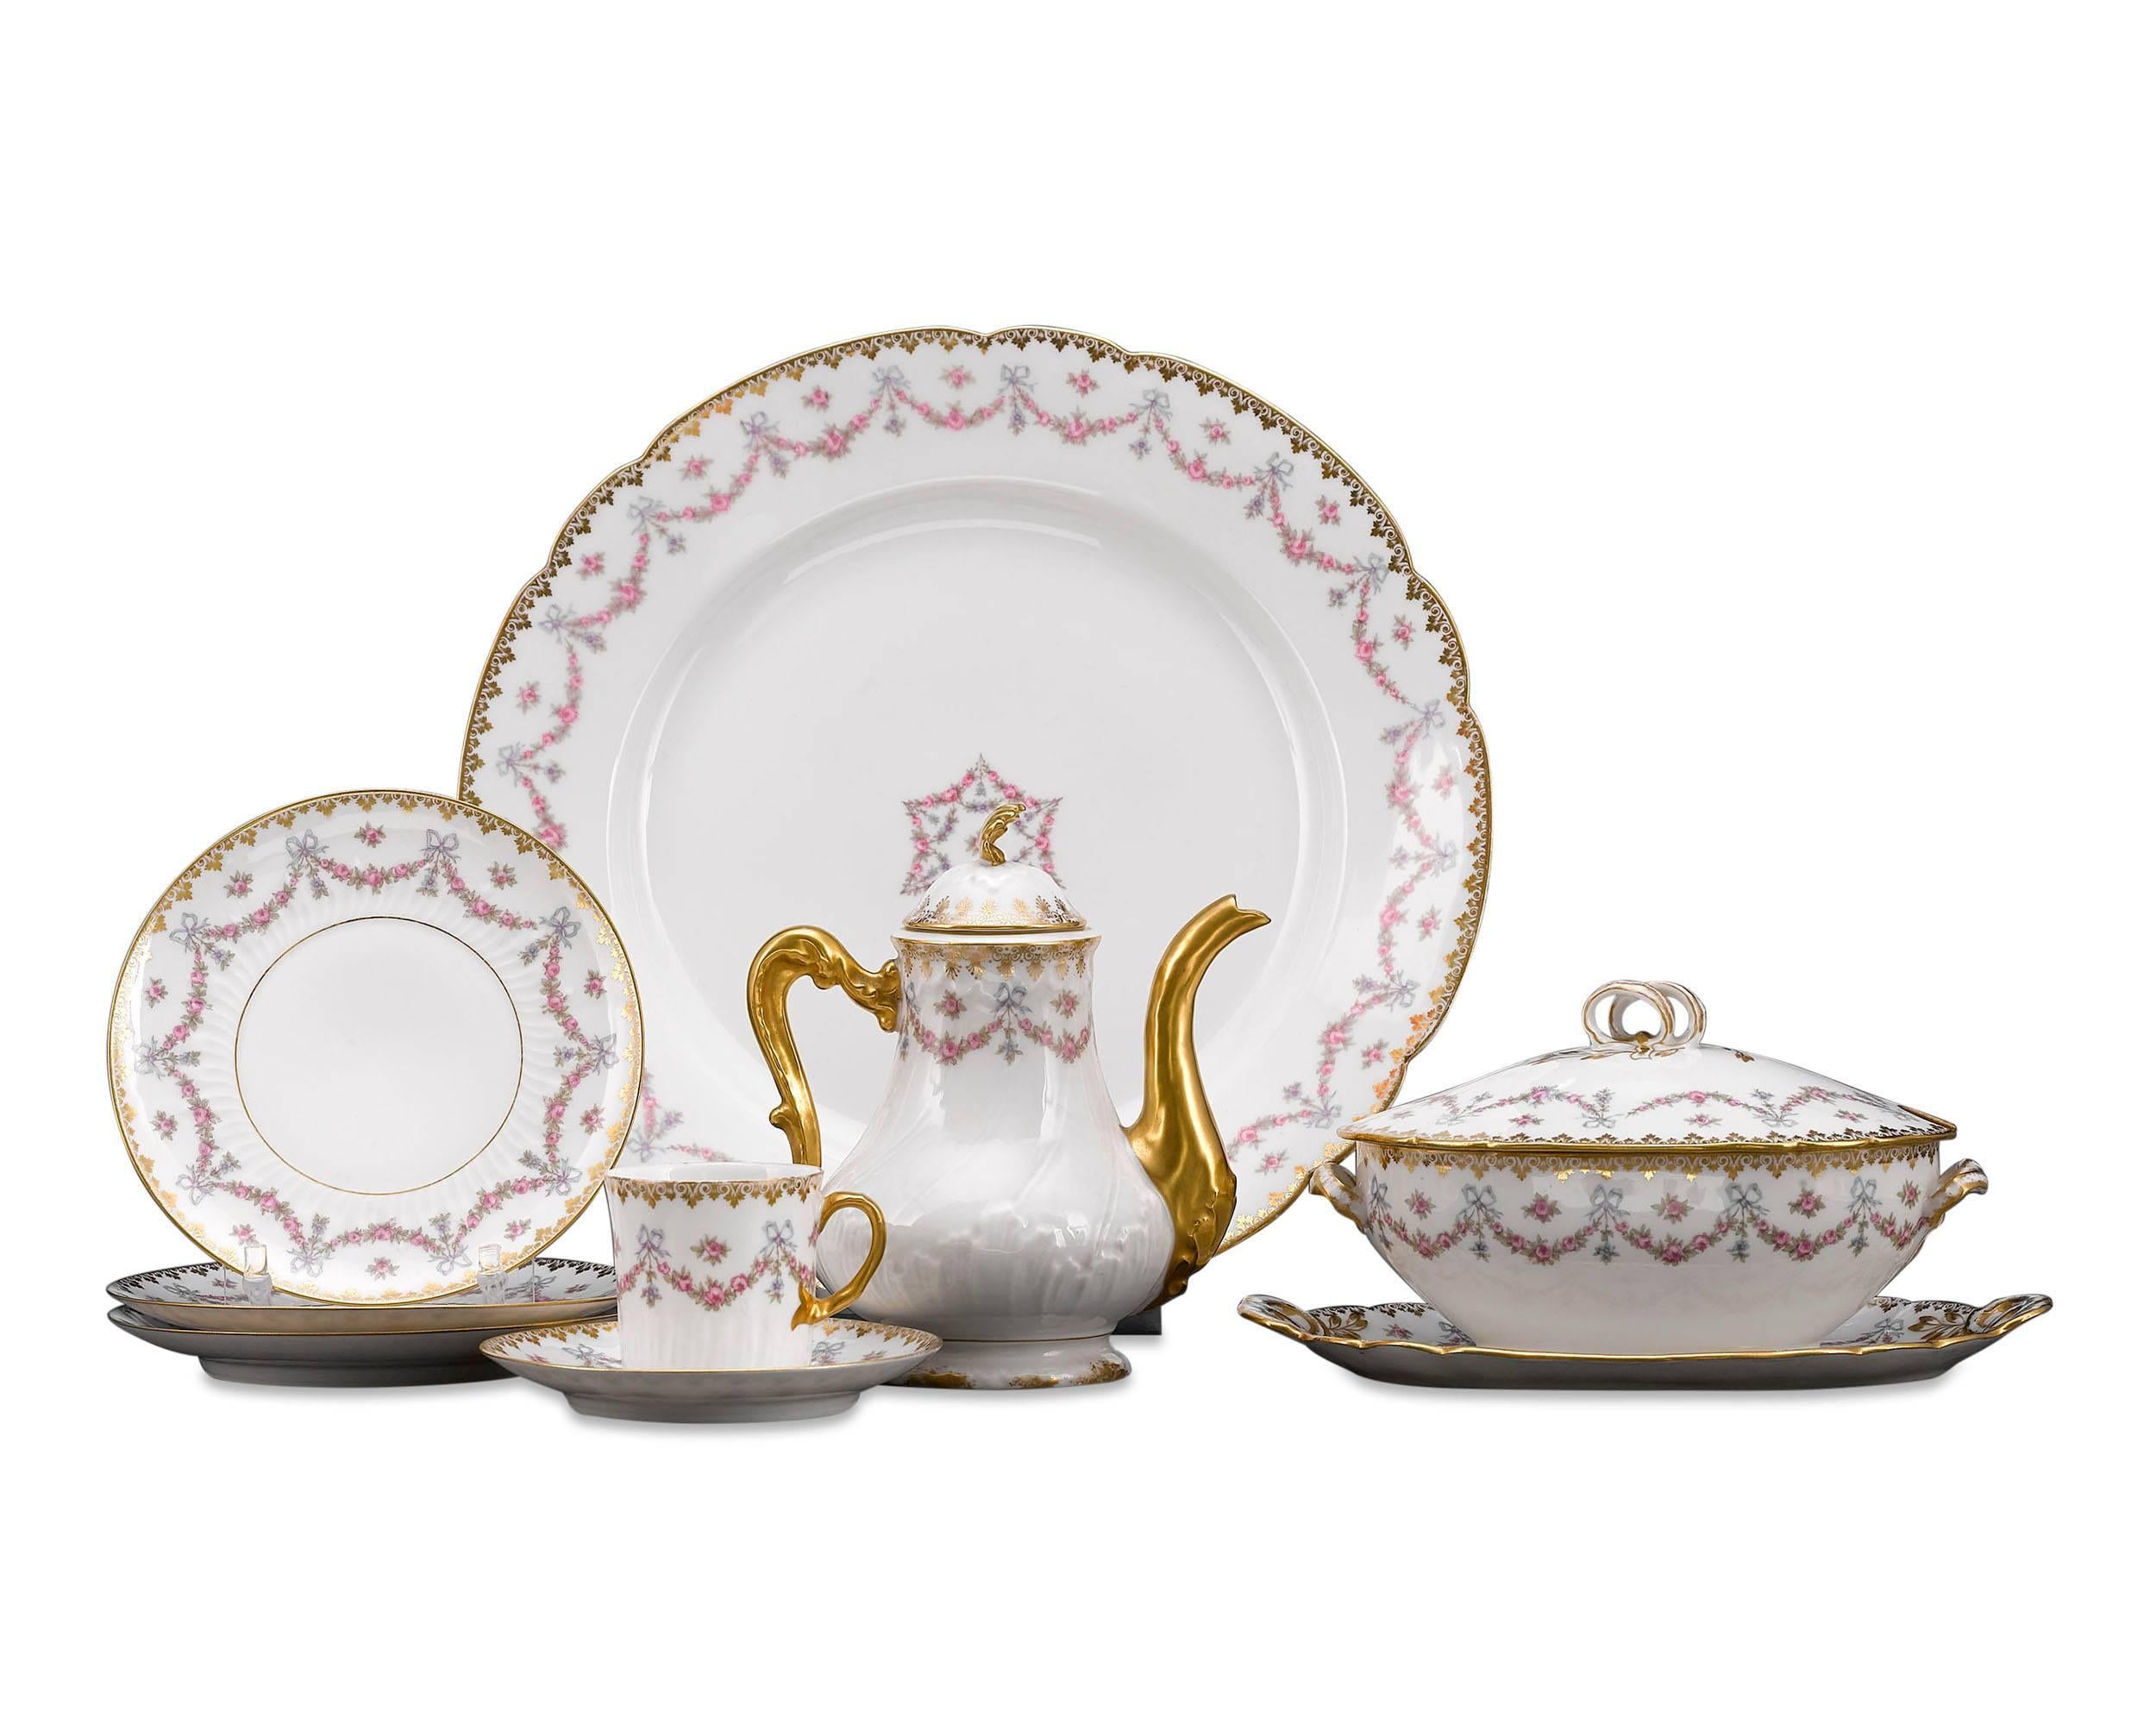 Delicate floral garlands and shimmering gilt accents distinguish this exceptional, 143-piece Limoges porcelain dinner service. Crafted by Gerard, Dufraisseix & Abbot, one of the most respected makers of Limoges porcelain, this beautiful service